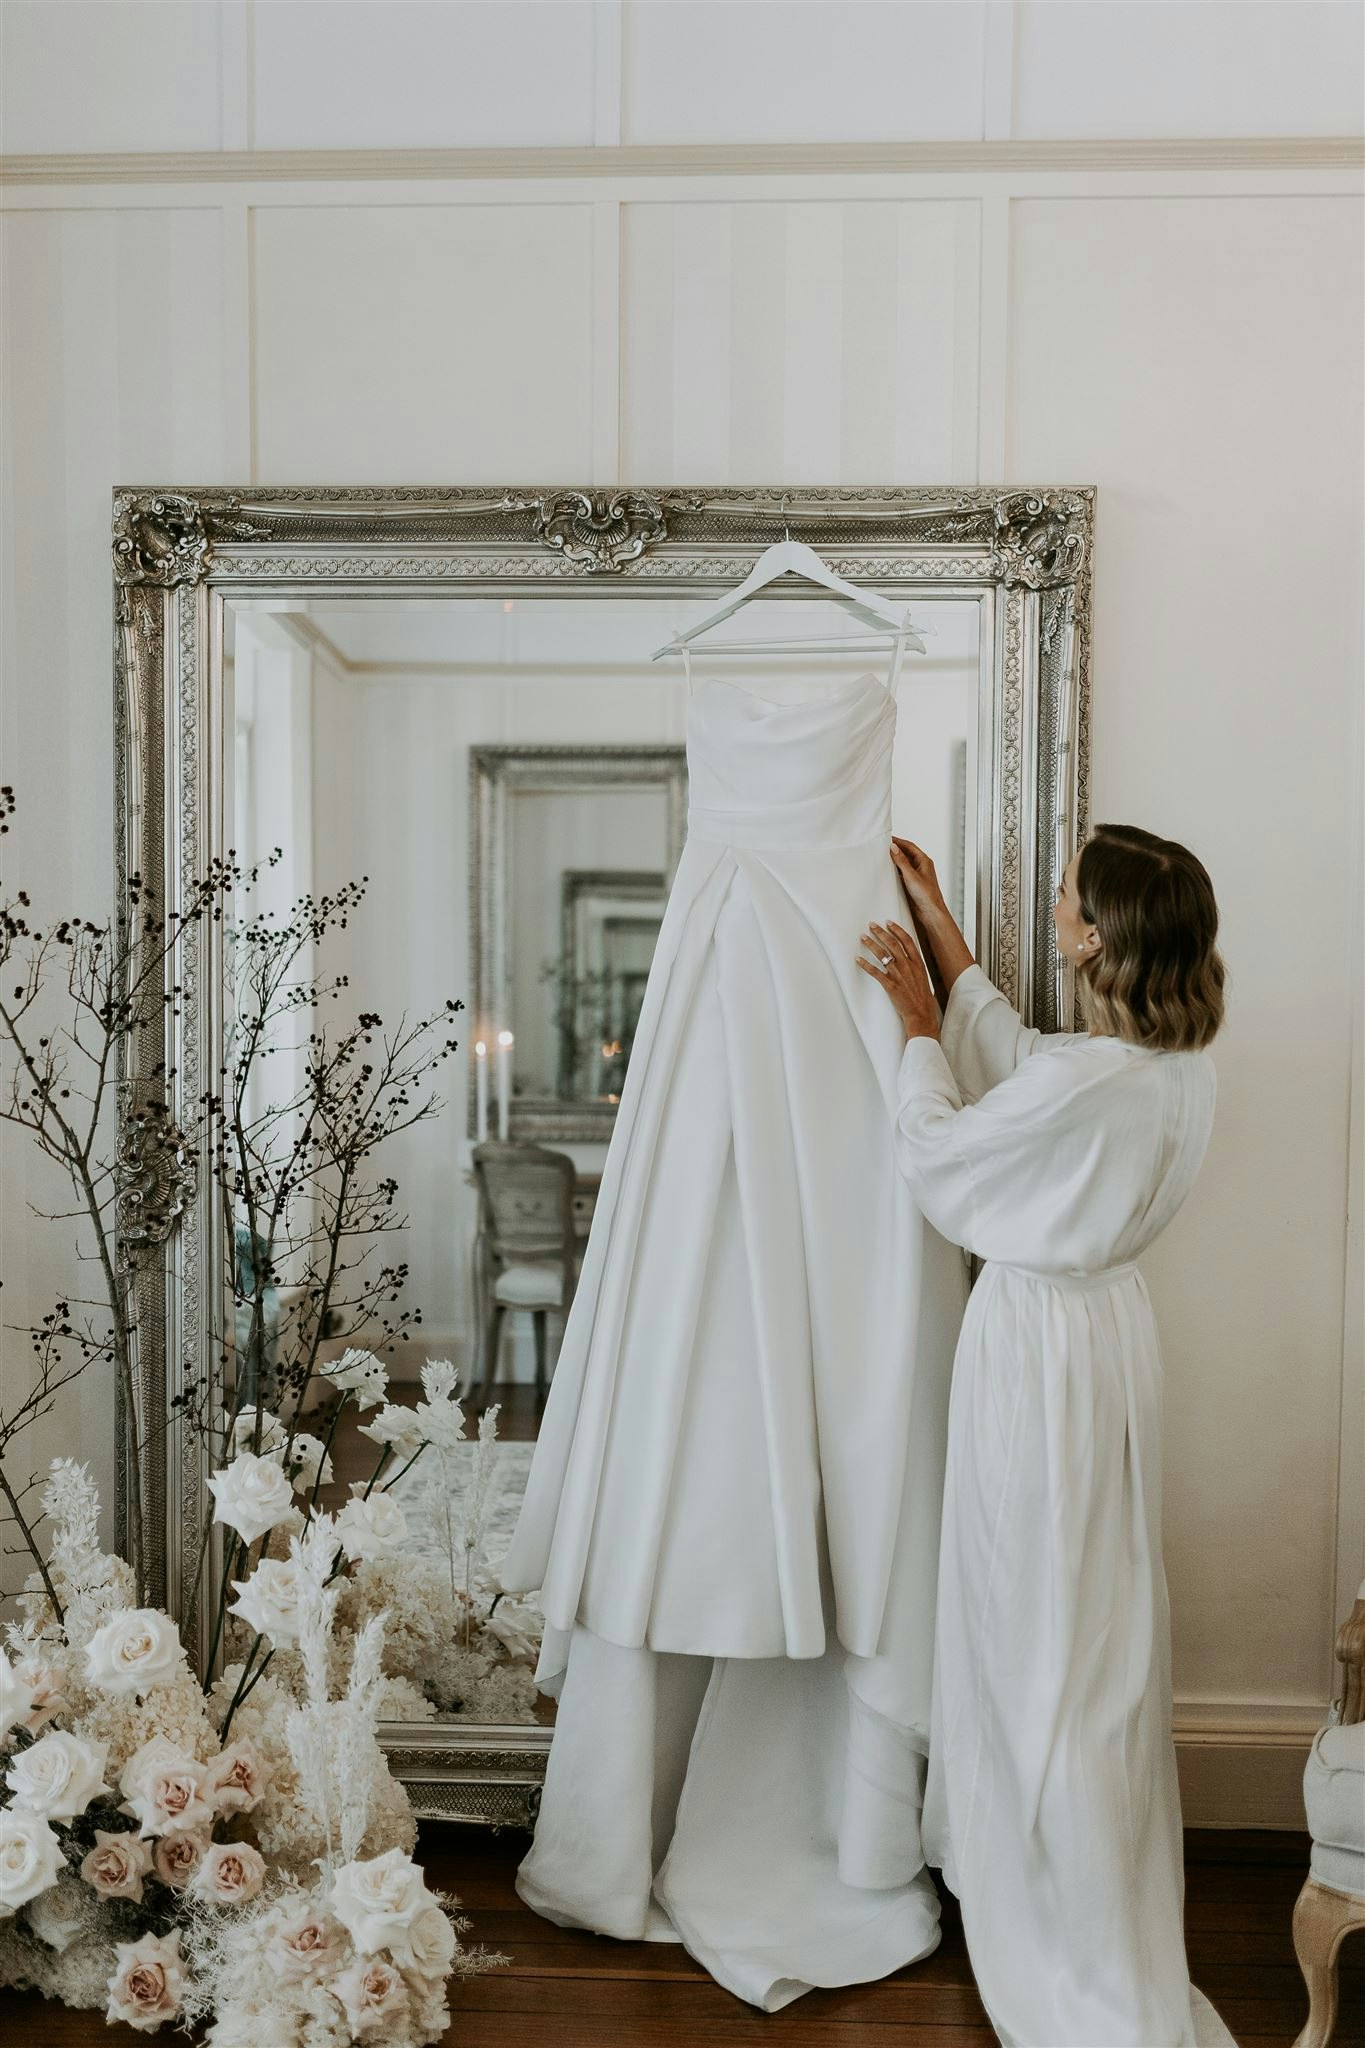 Bride prepares on wedding day by reaching up and touching her gown